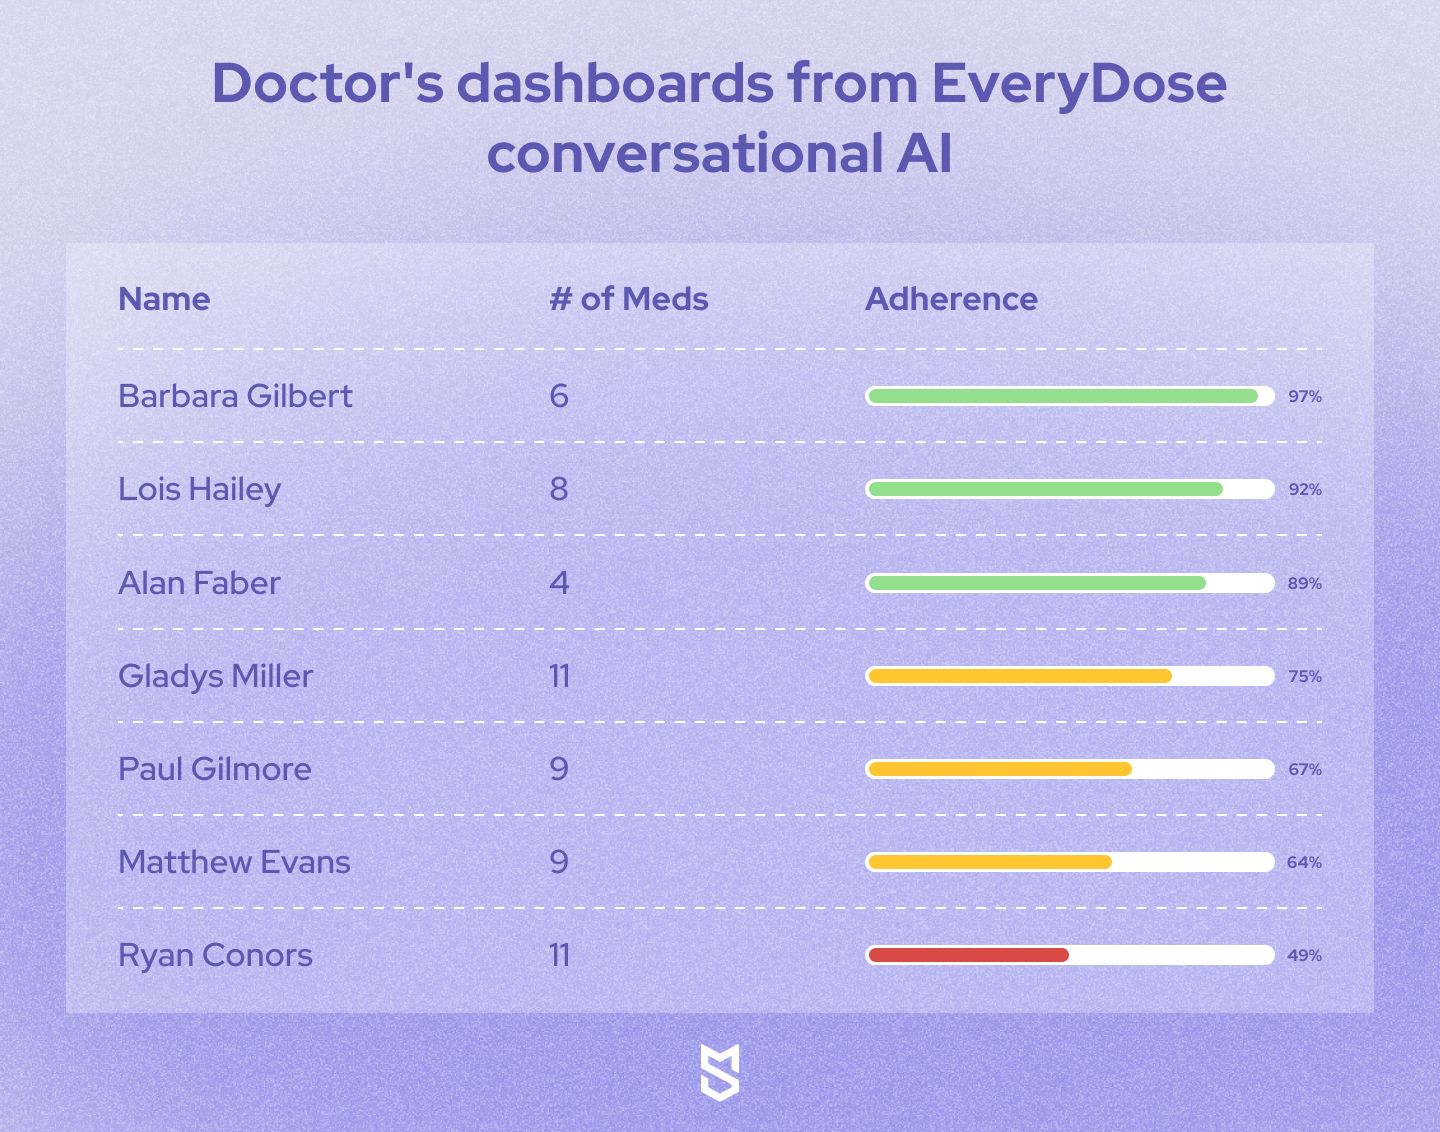 Doctor's dashboards from EveryDose conversational AI